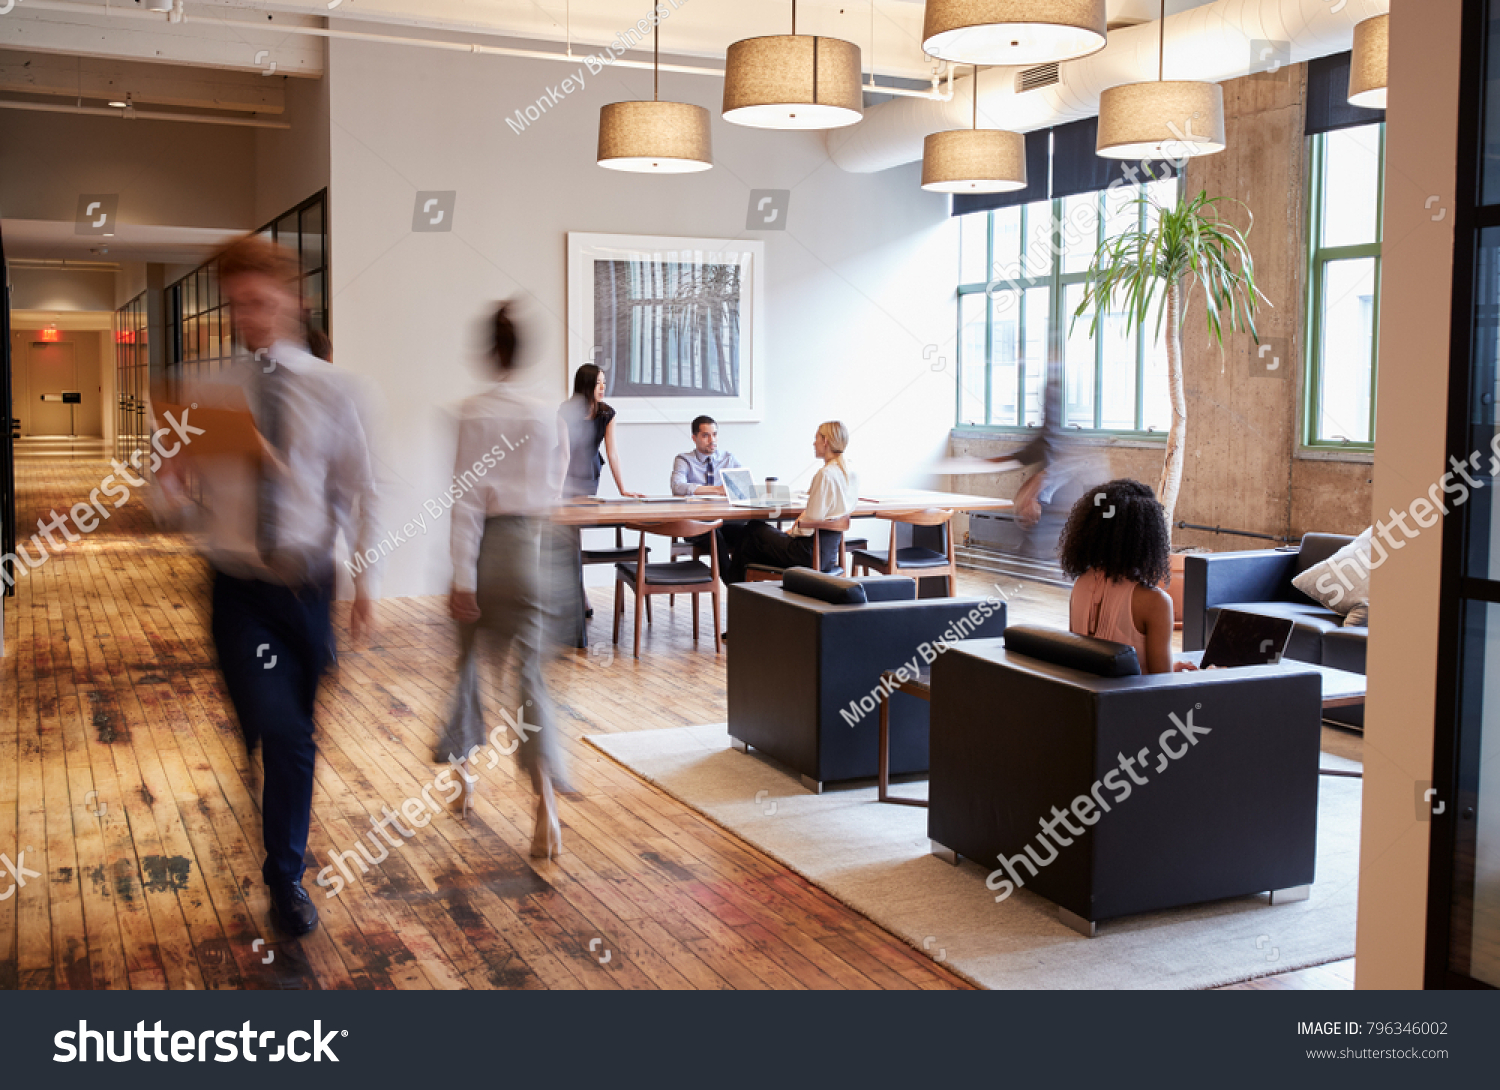 Business people at work in a busy luxury office space #796346002